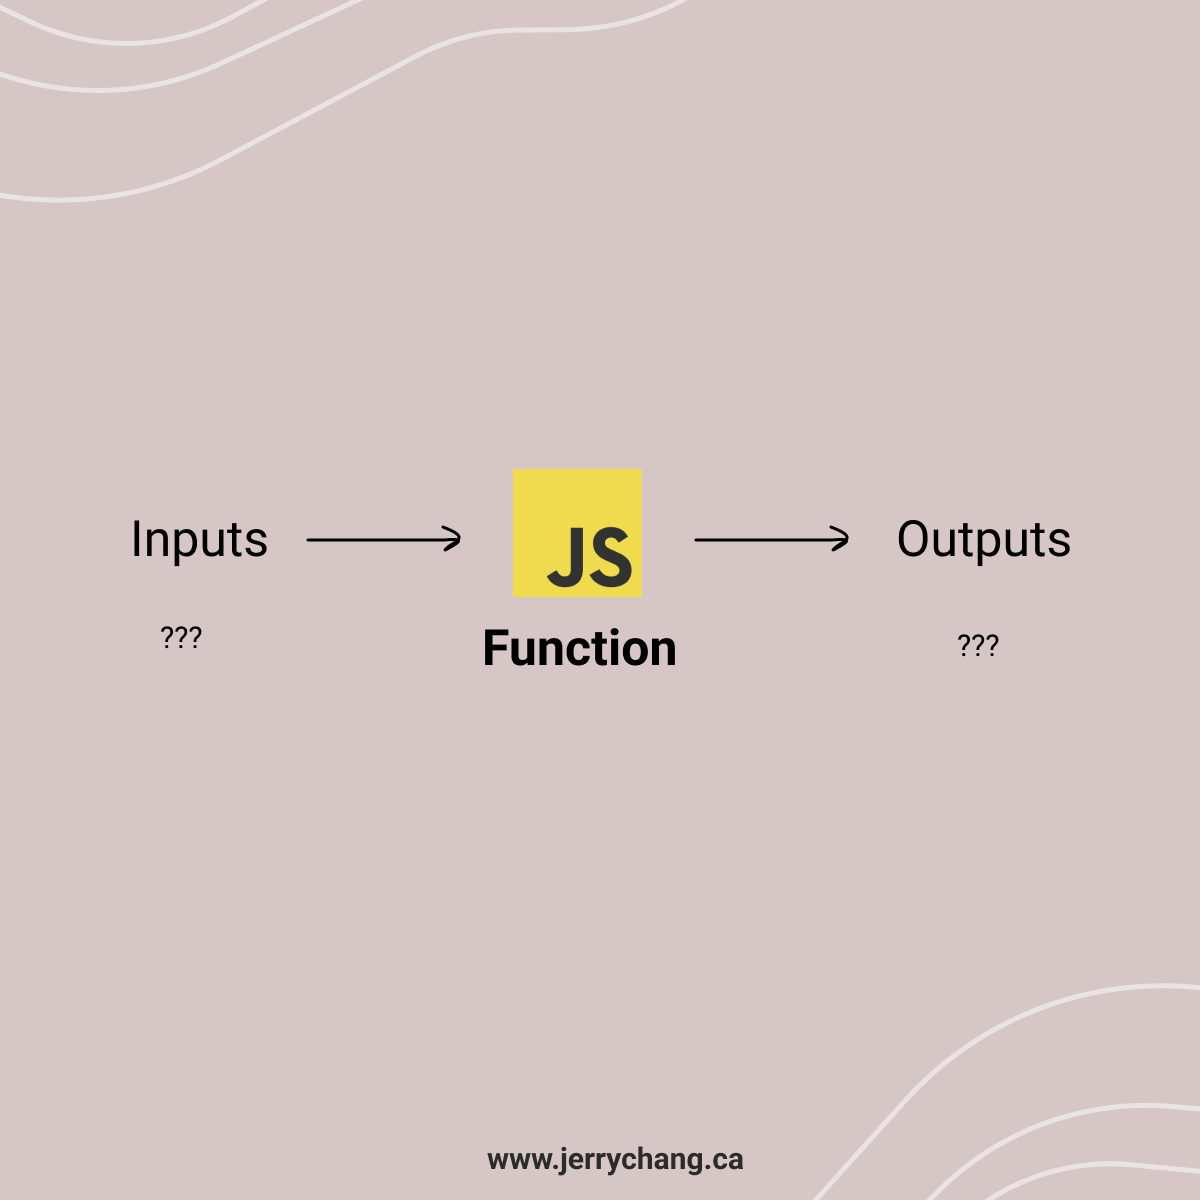 Illustration inputs and outputs in a Javascript function